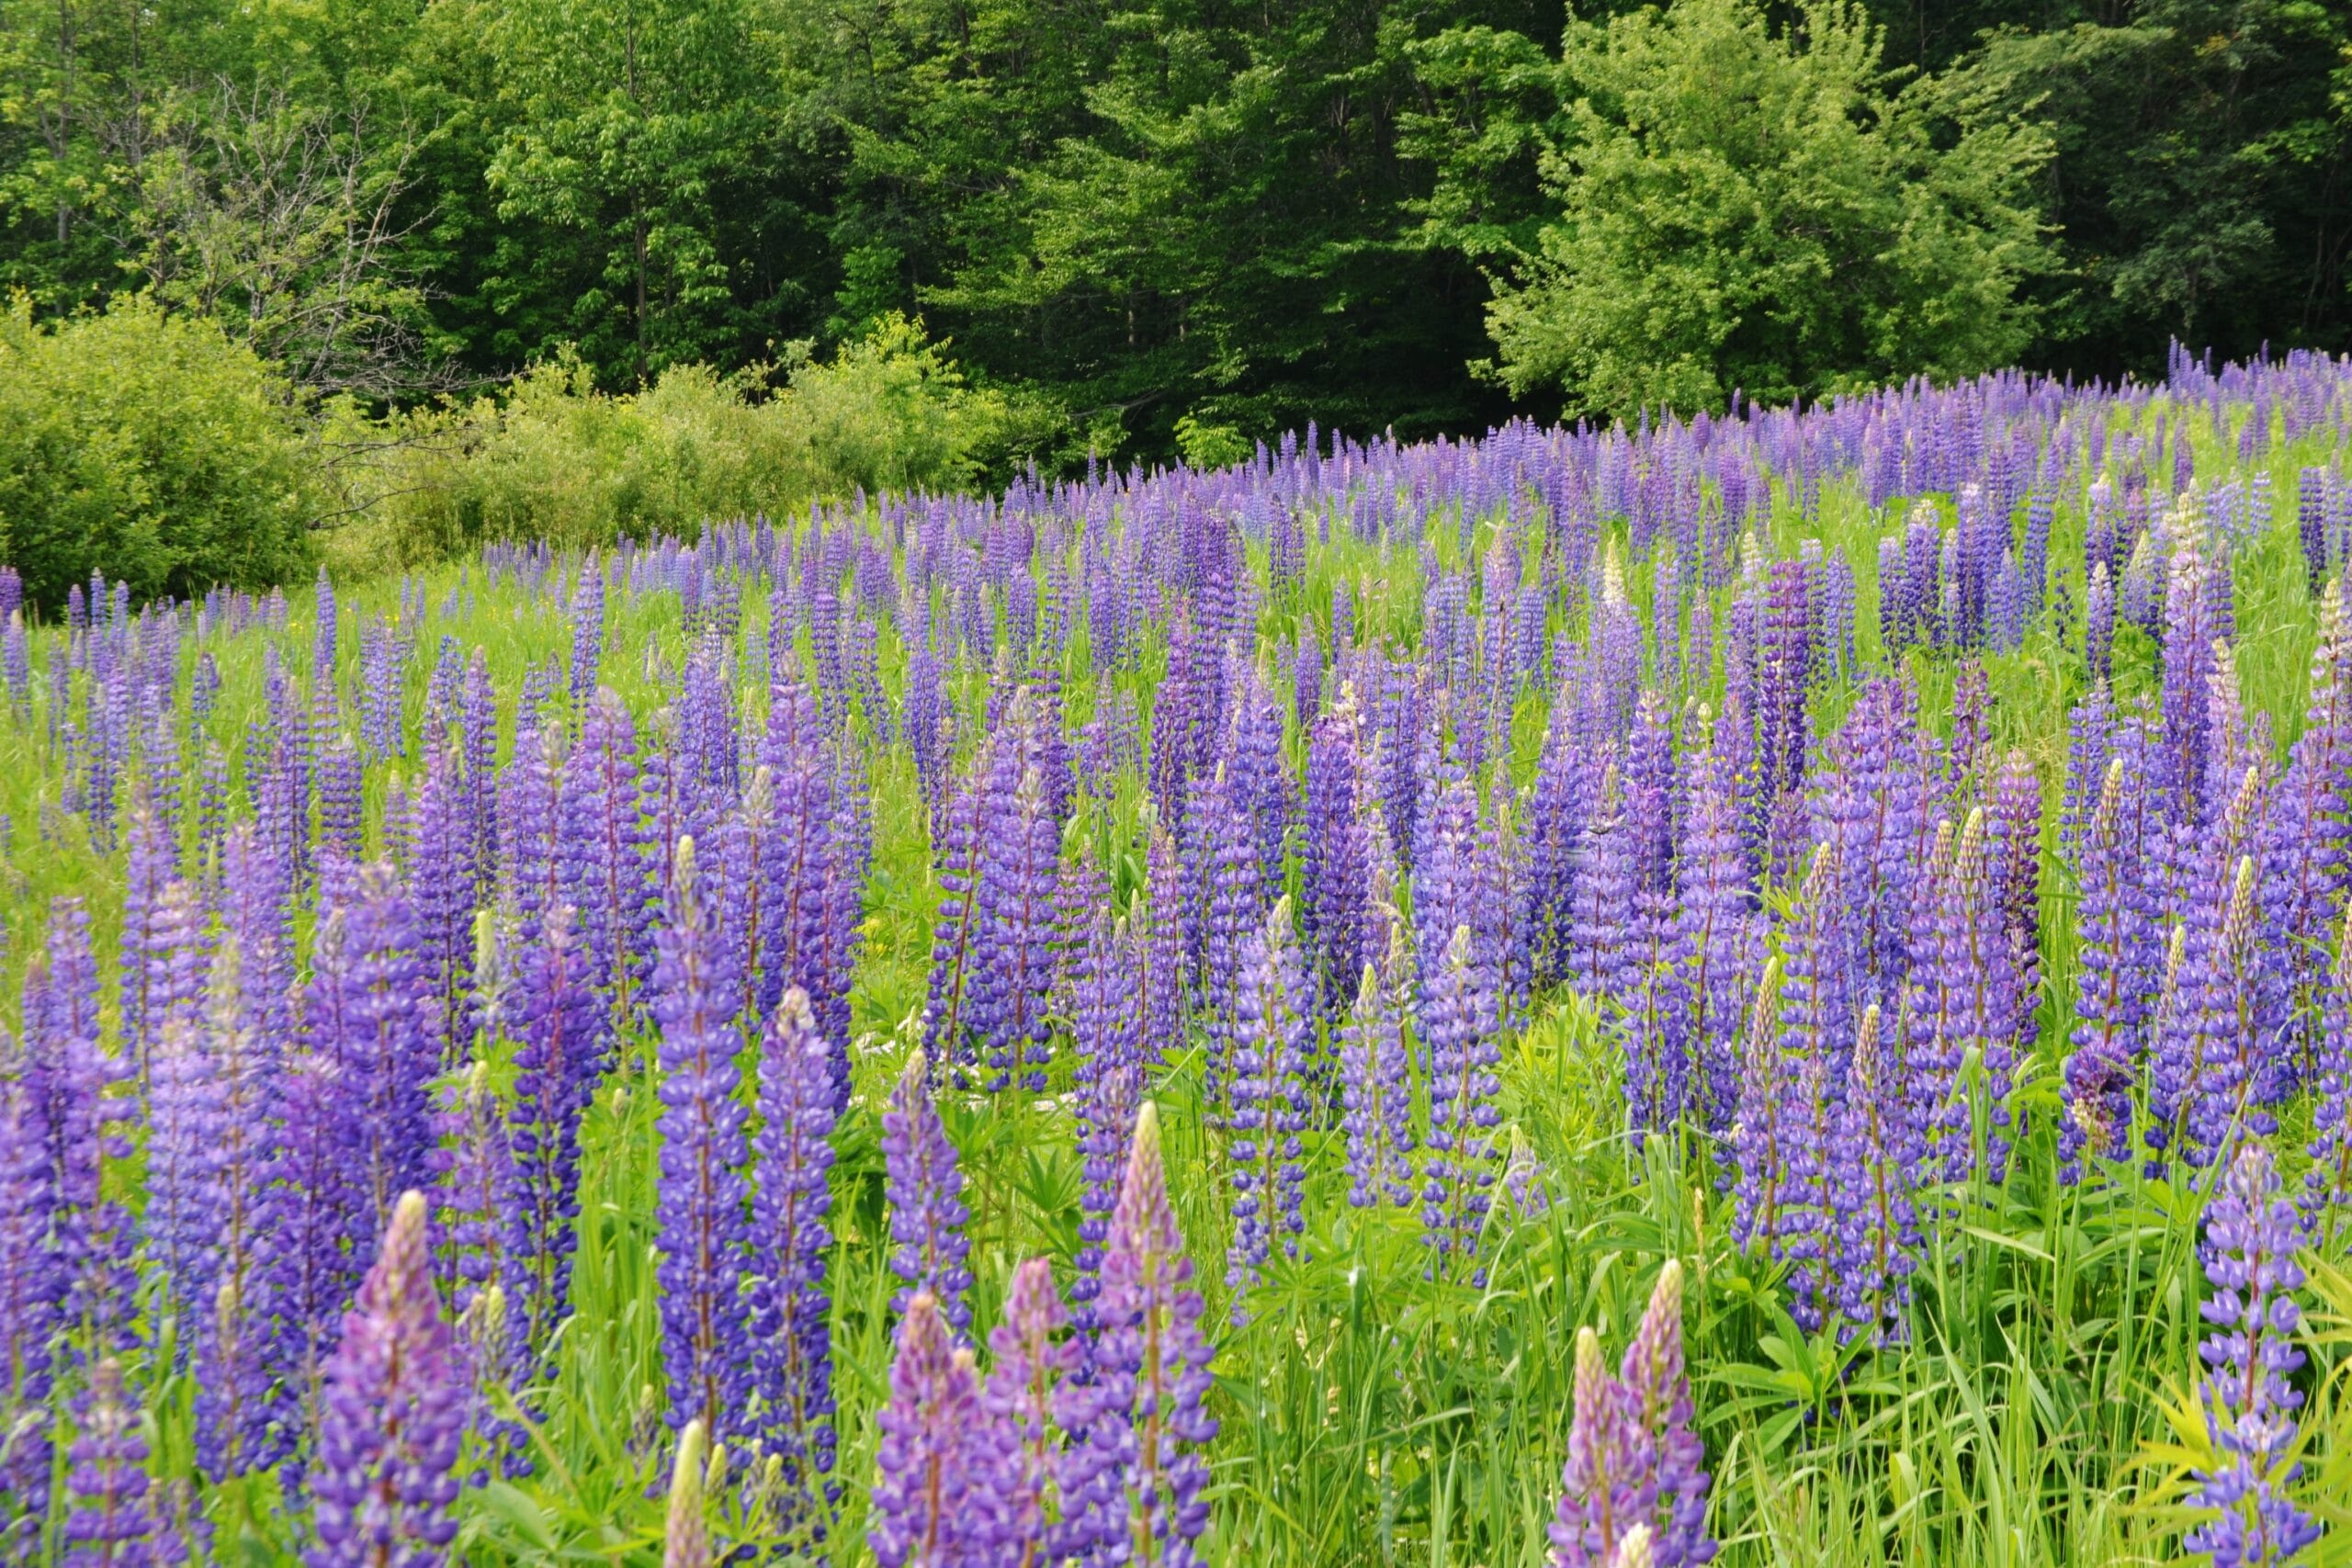 Field of Lupines Festival June 2018 in Franconia New Hampshire